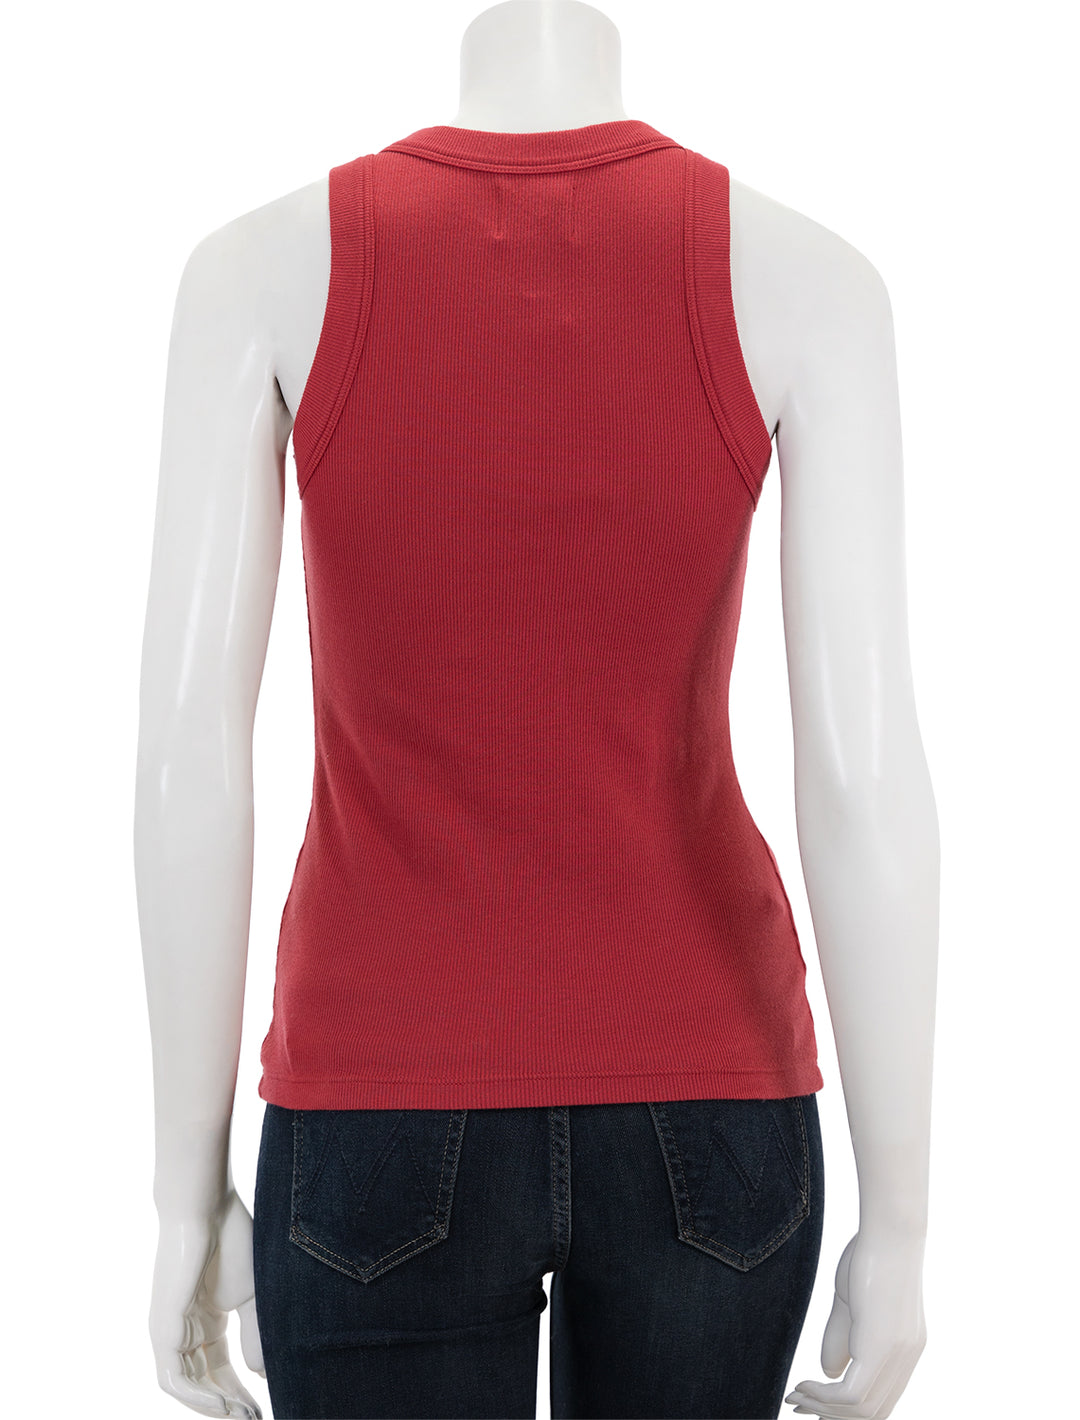 Back view of Sundays NYC's turner tank in true red.